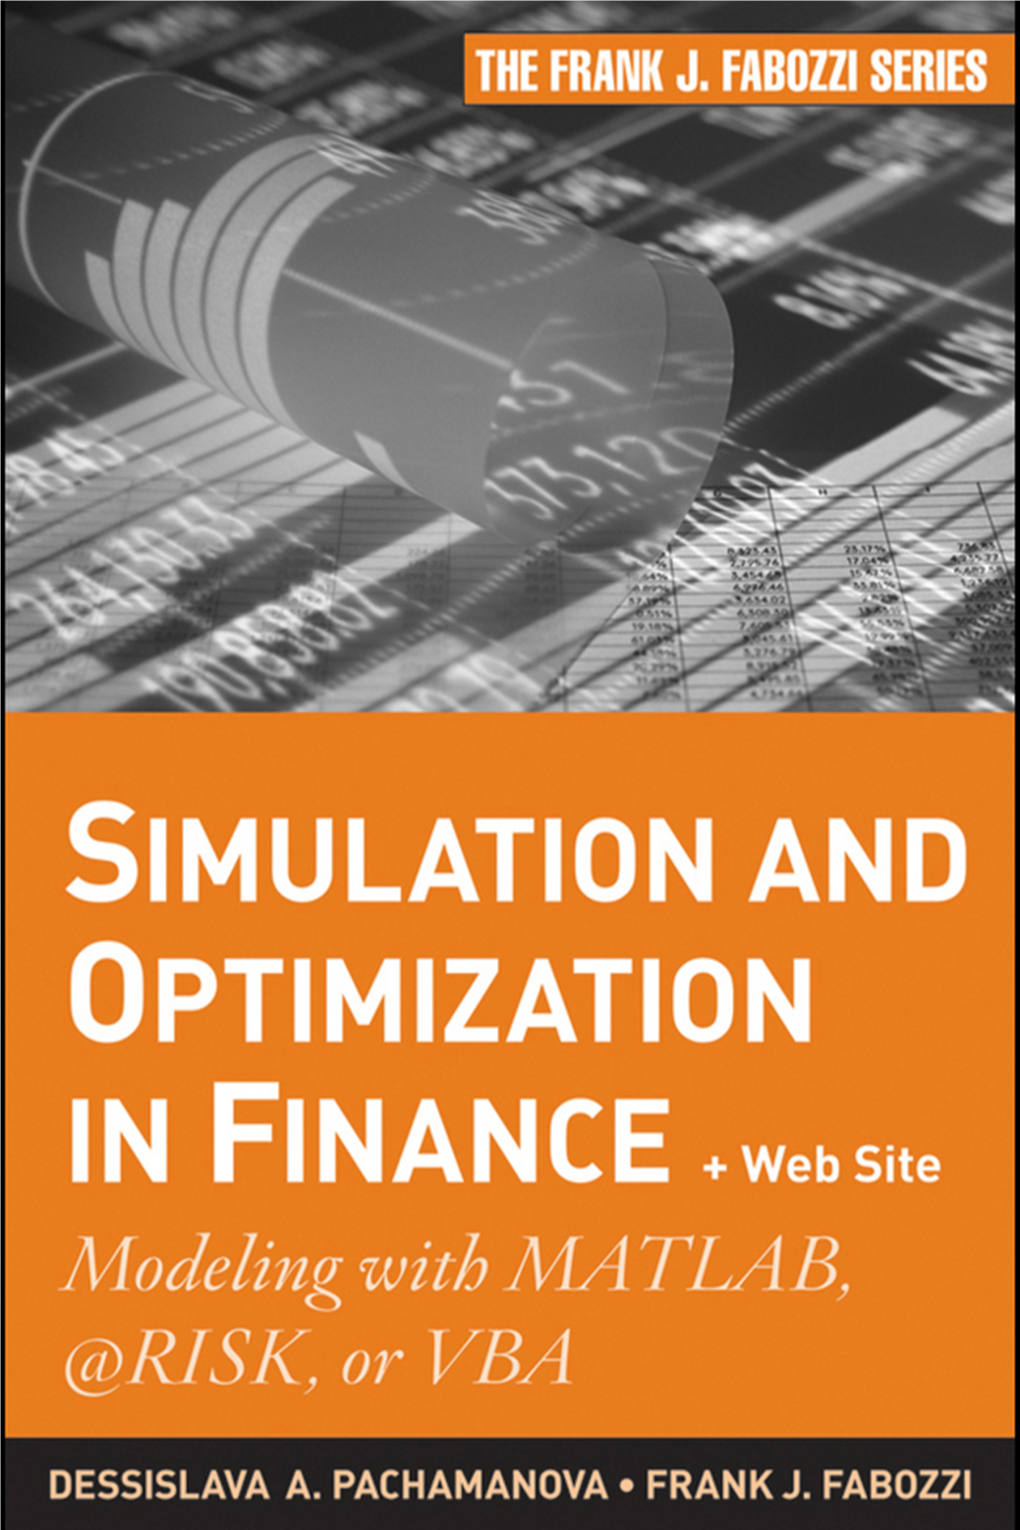 Simulation and Optimization in Finance the Frank J